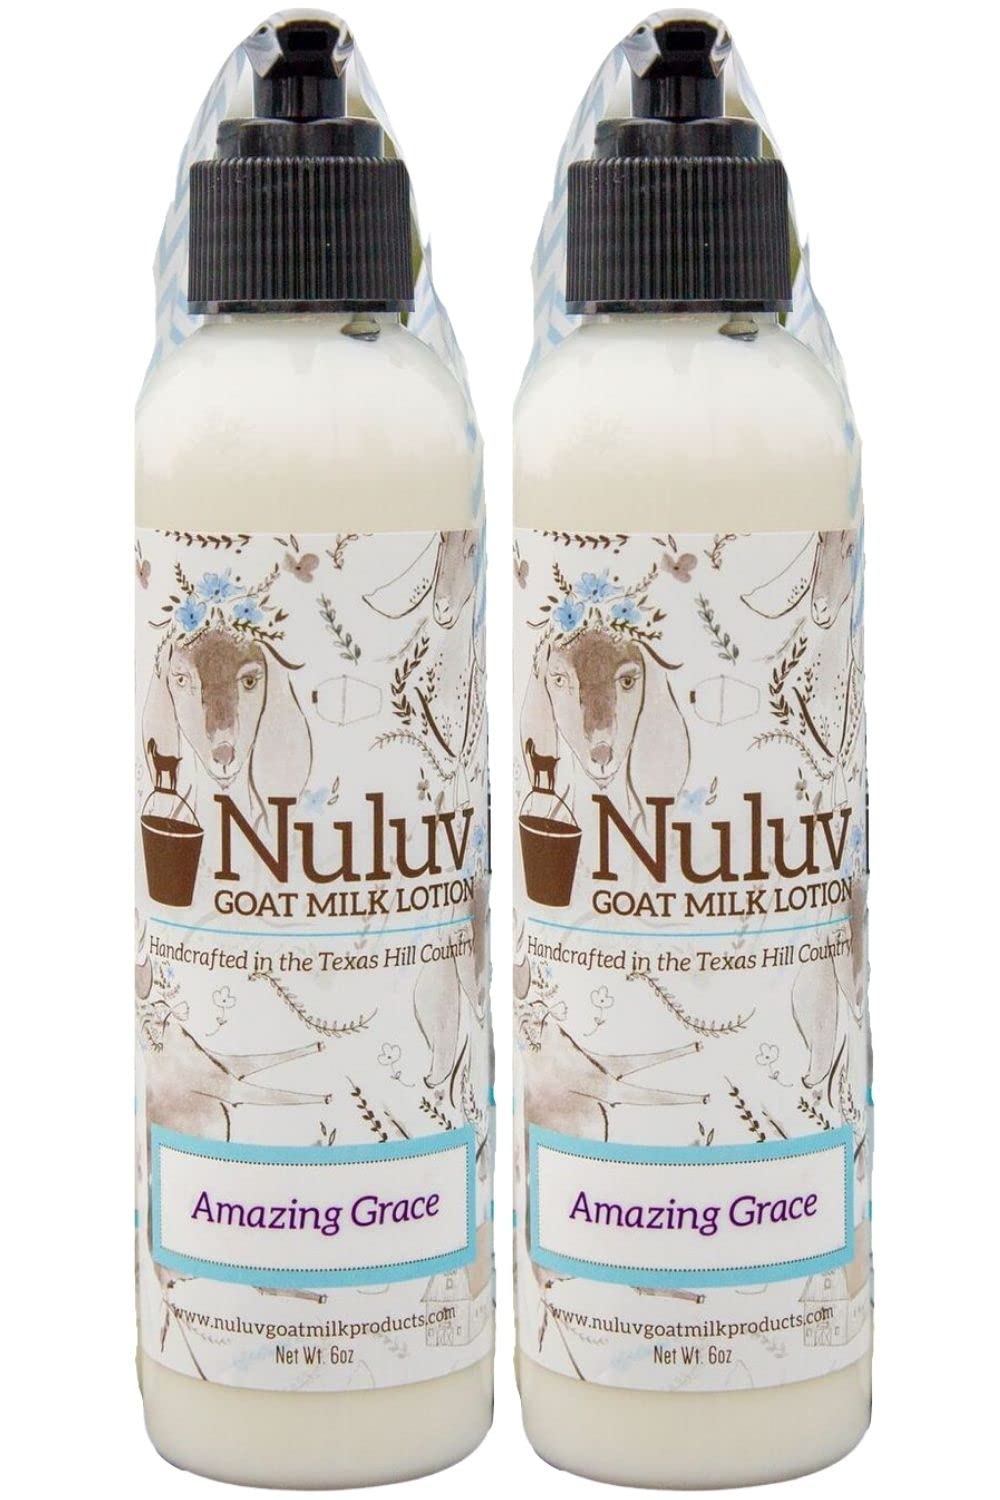 Nuluv Goat Milk Body Lotion Soothing for Hands and Body, Soft, Healthy Skin 6  2-Pack Cruelty-Free and Paraben-Free, Made in USA